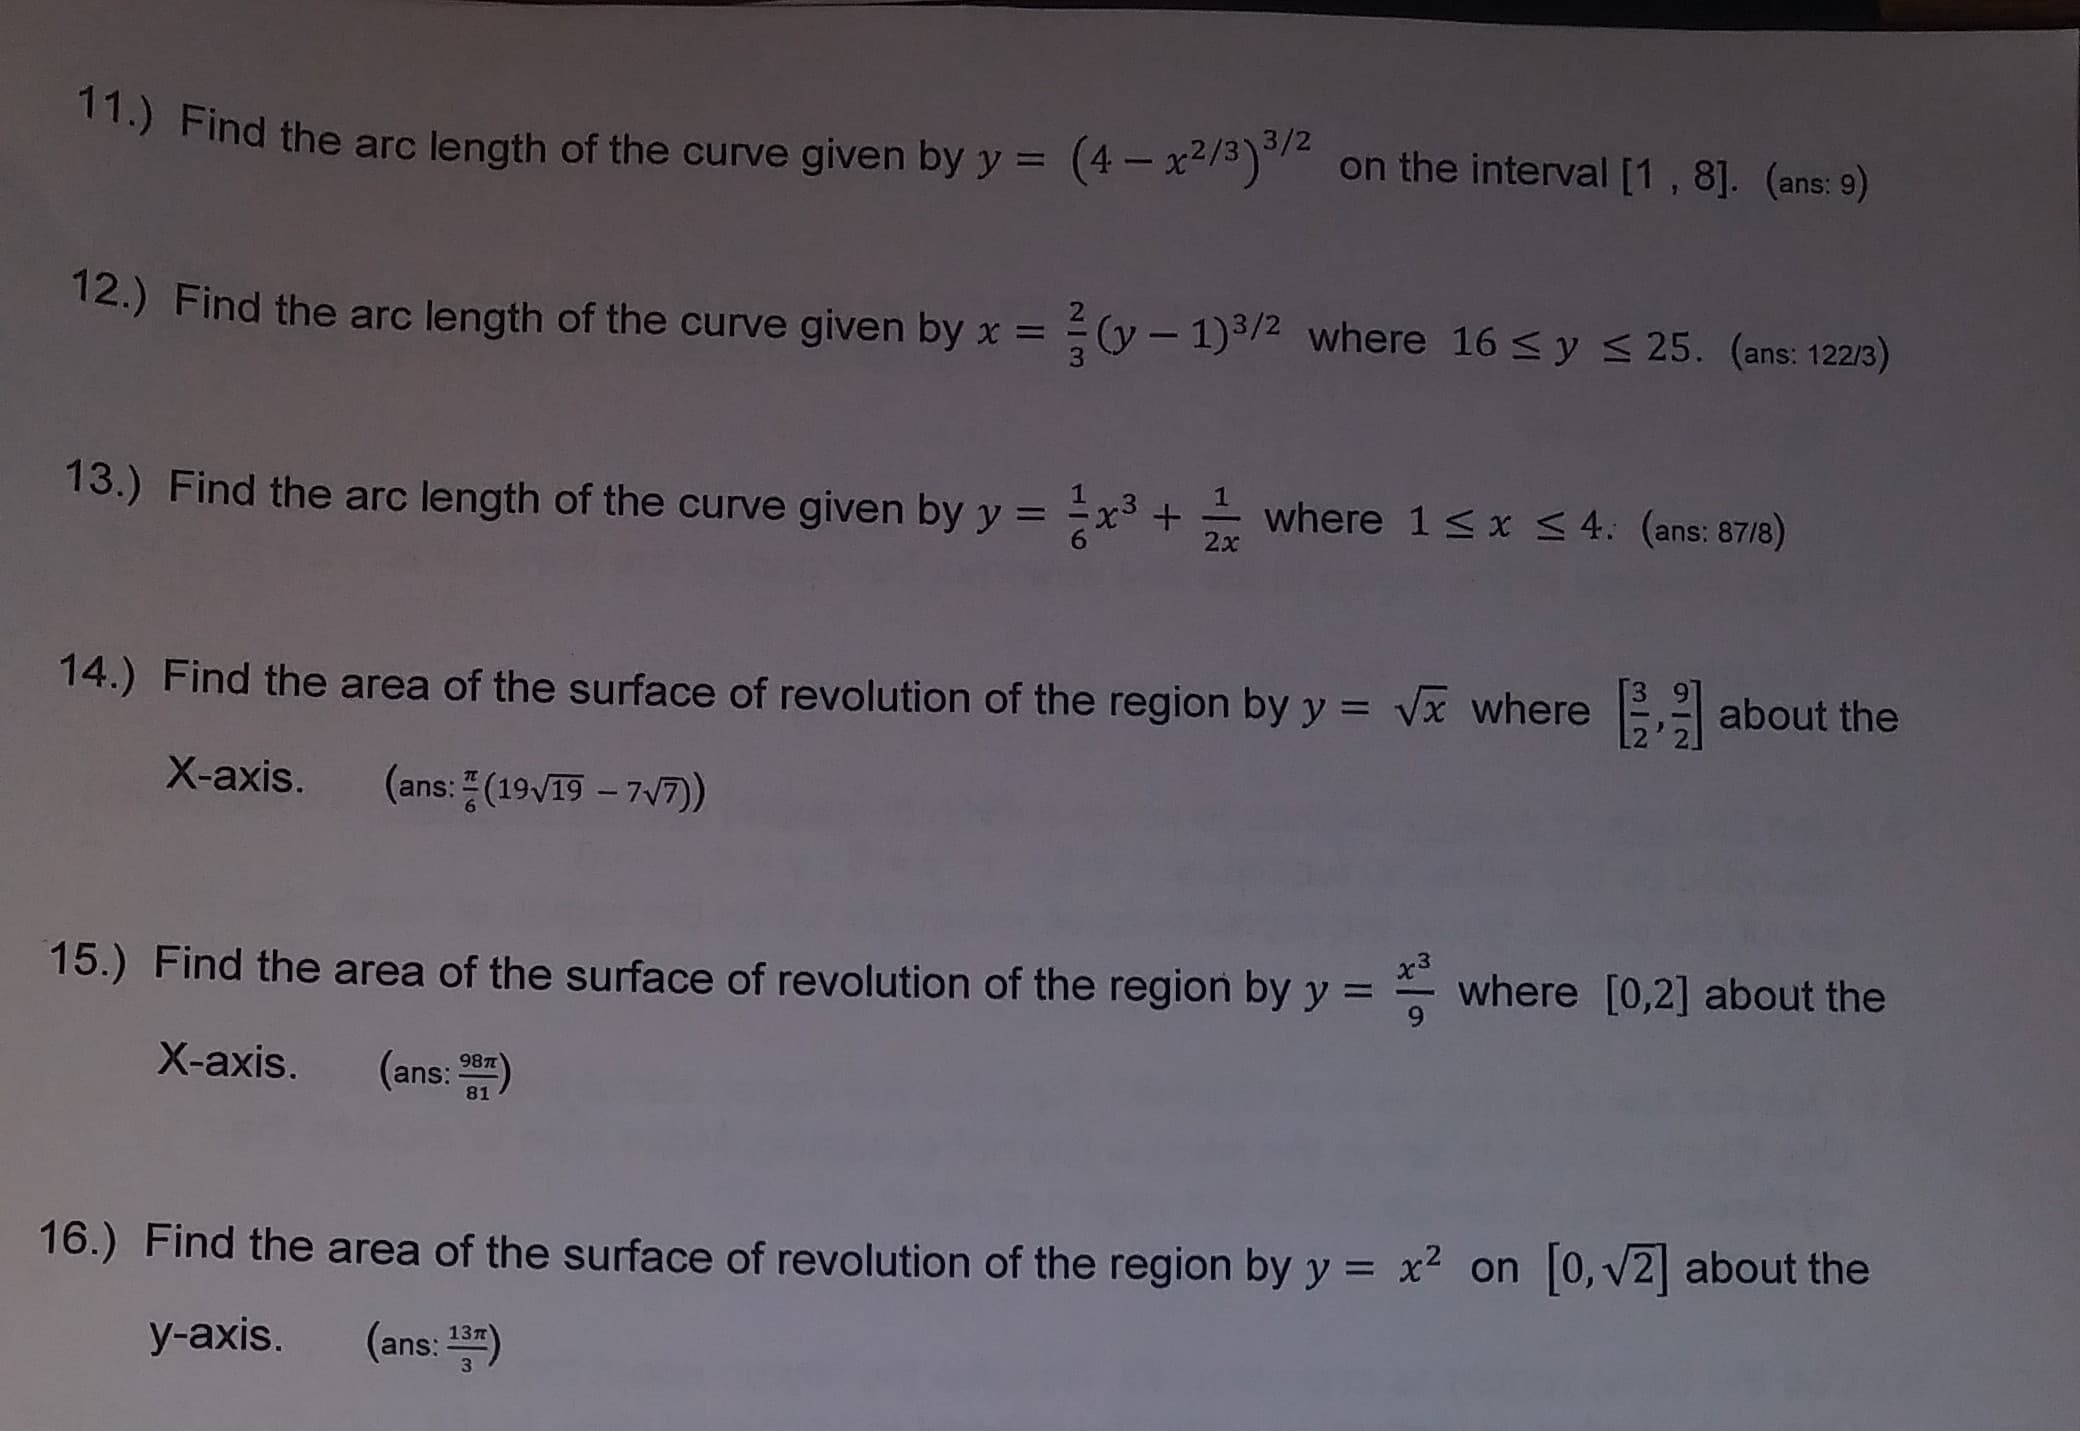 11.) Find the arc length of the curve given by y (4on the interval [1, 81. (ome:-)
3/2
(4x2/3o
on the interval [1, 8]. (ans: 9)
Find the arc length of the curve given by x-
2 (y - 1)3/2 where 16 s y s 25. (ans: 122/3)
13.) Find the arc length of the curve given byyx where 1 s x 4. (ans: 8718)
14.) Find the area of the surface of revolution of the region by y
vx where
about the
X-axis. (ans: (1917)
3
where [0,2] about the
Find the area of the surface of revolution of the region by y
X-axis. (ans: a)
15.)
16,) Find the area of the surface of revolution of the region by y 2 on [o,v2] about the
y-axis. (ans: 13)
